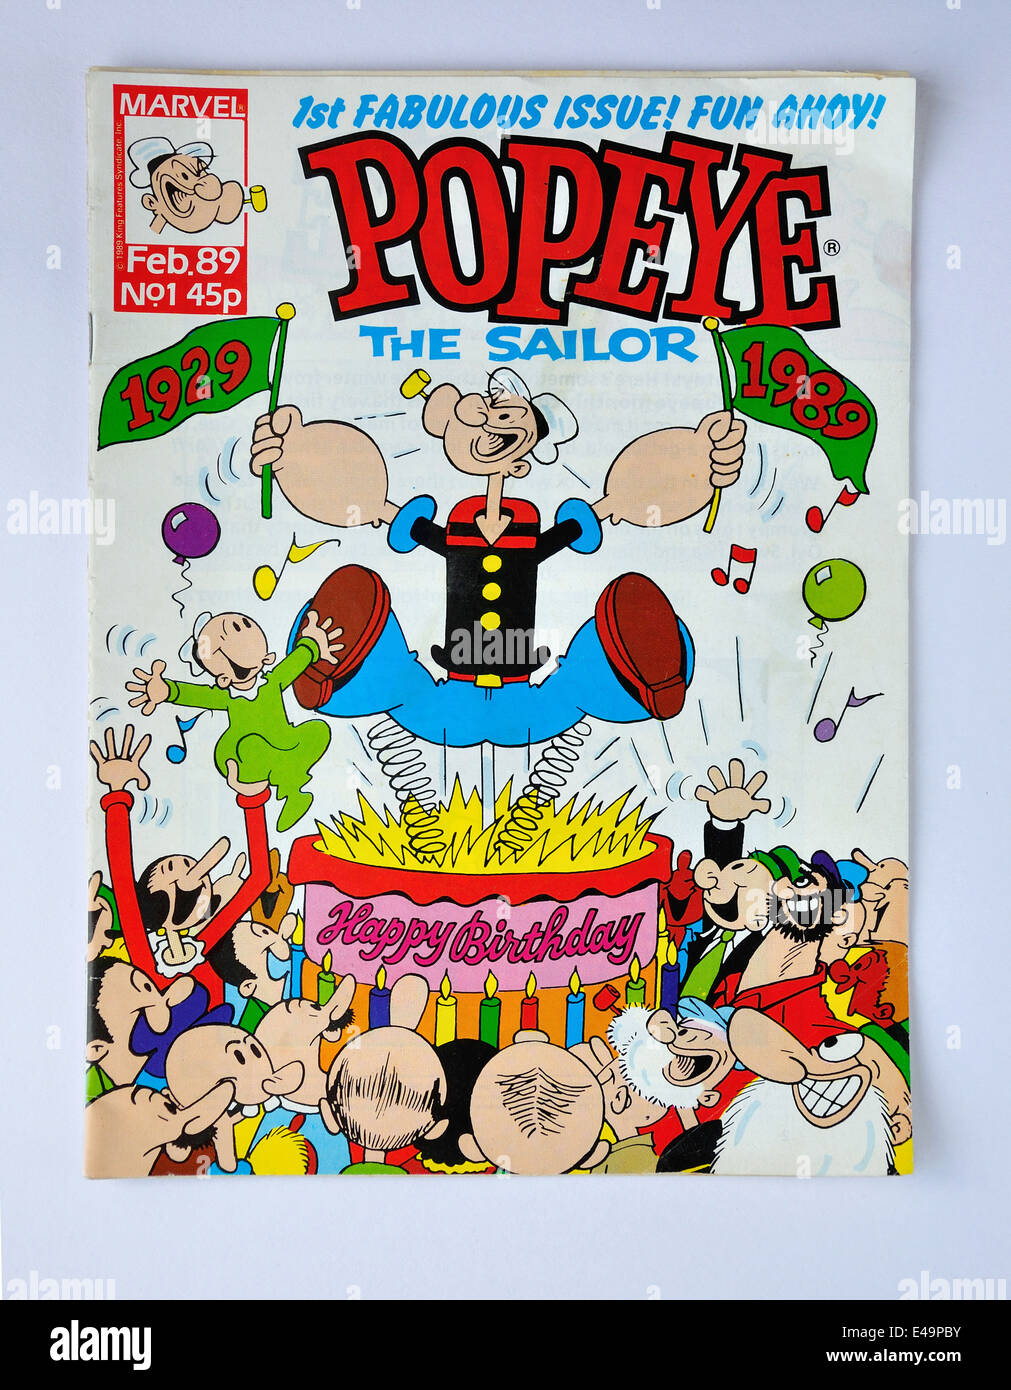 Popeye le marin n°1. question bande dessinée 1989, Surrey, Angleterre, Royaume-Uni Banque D'Images